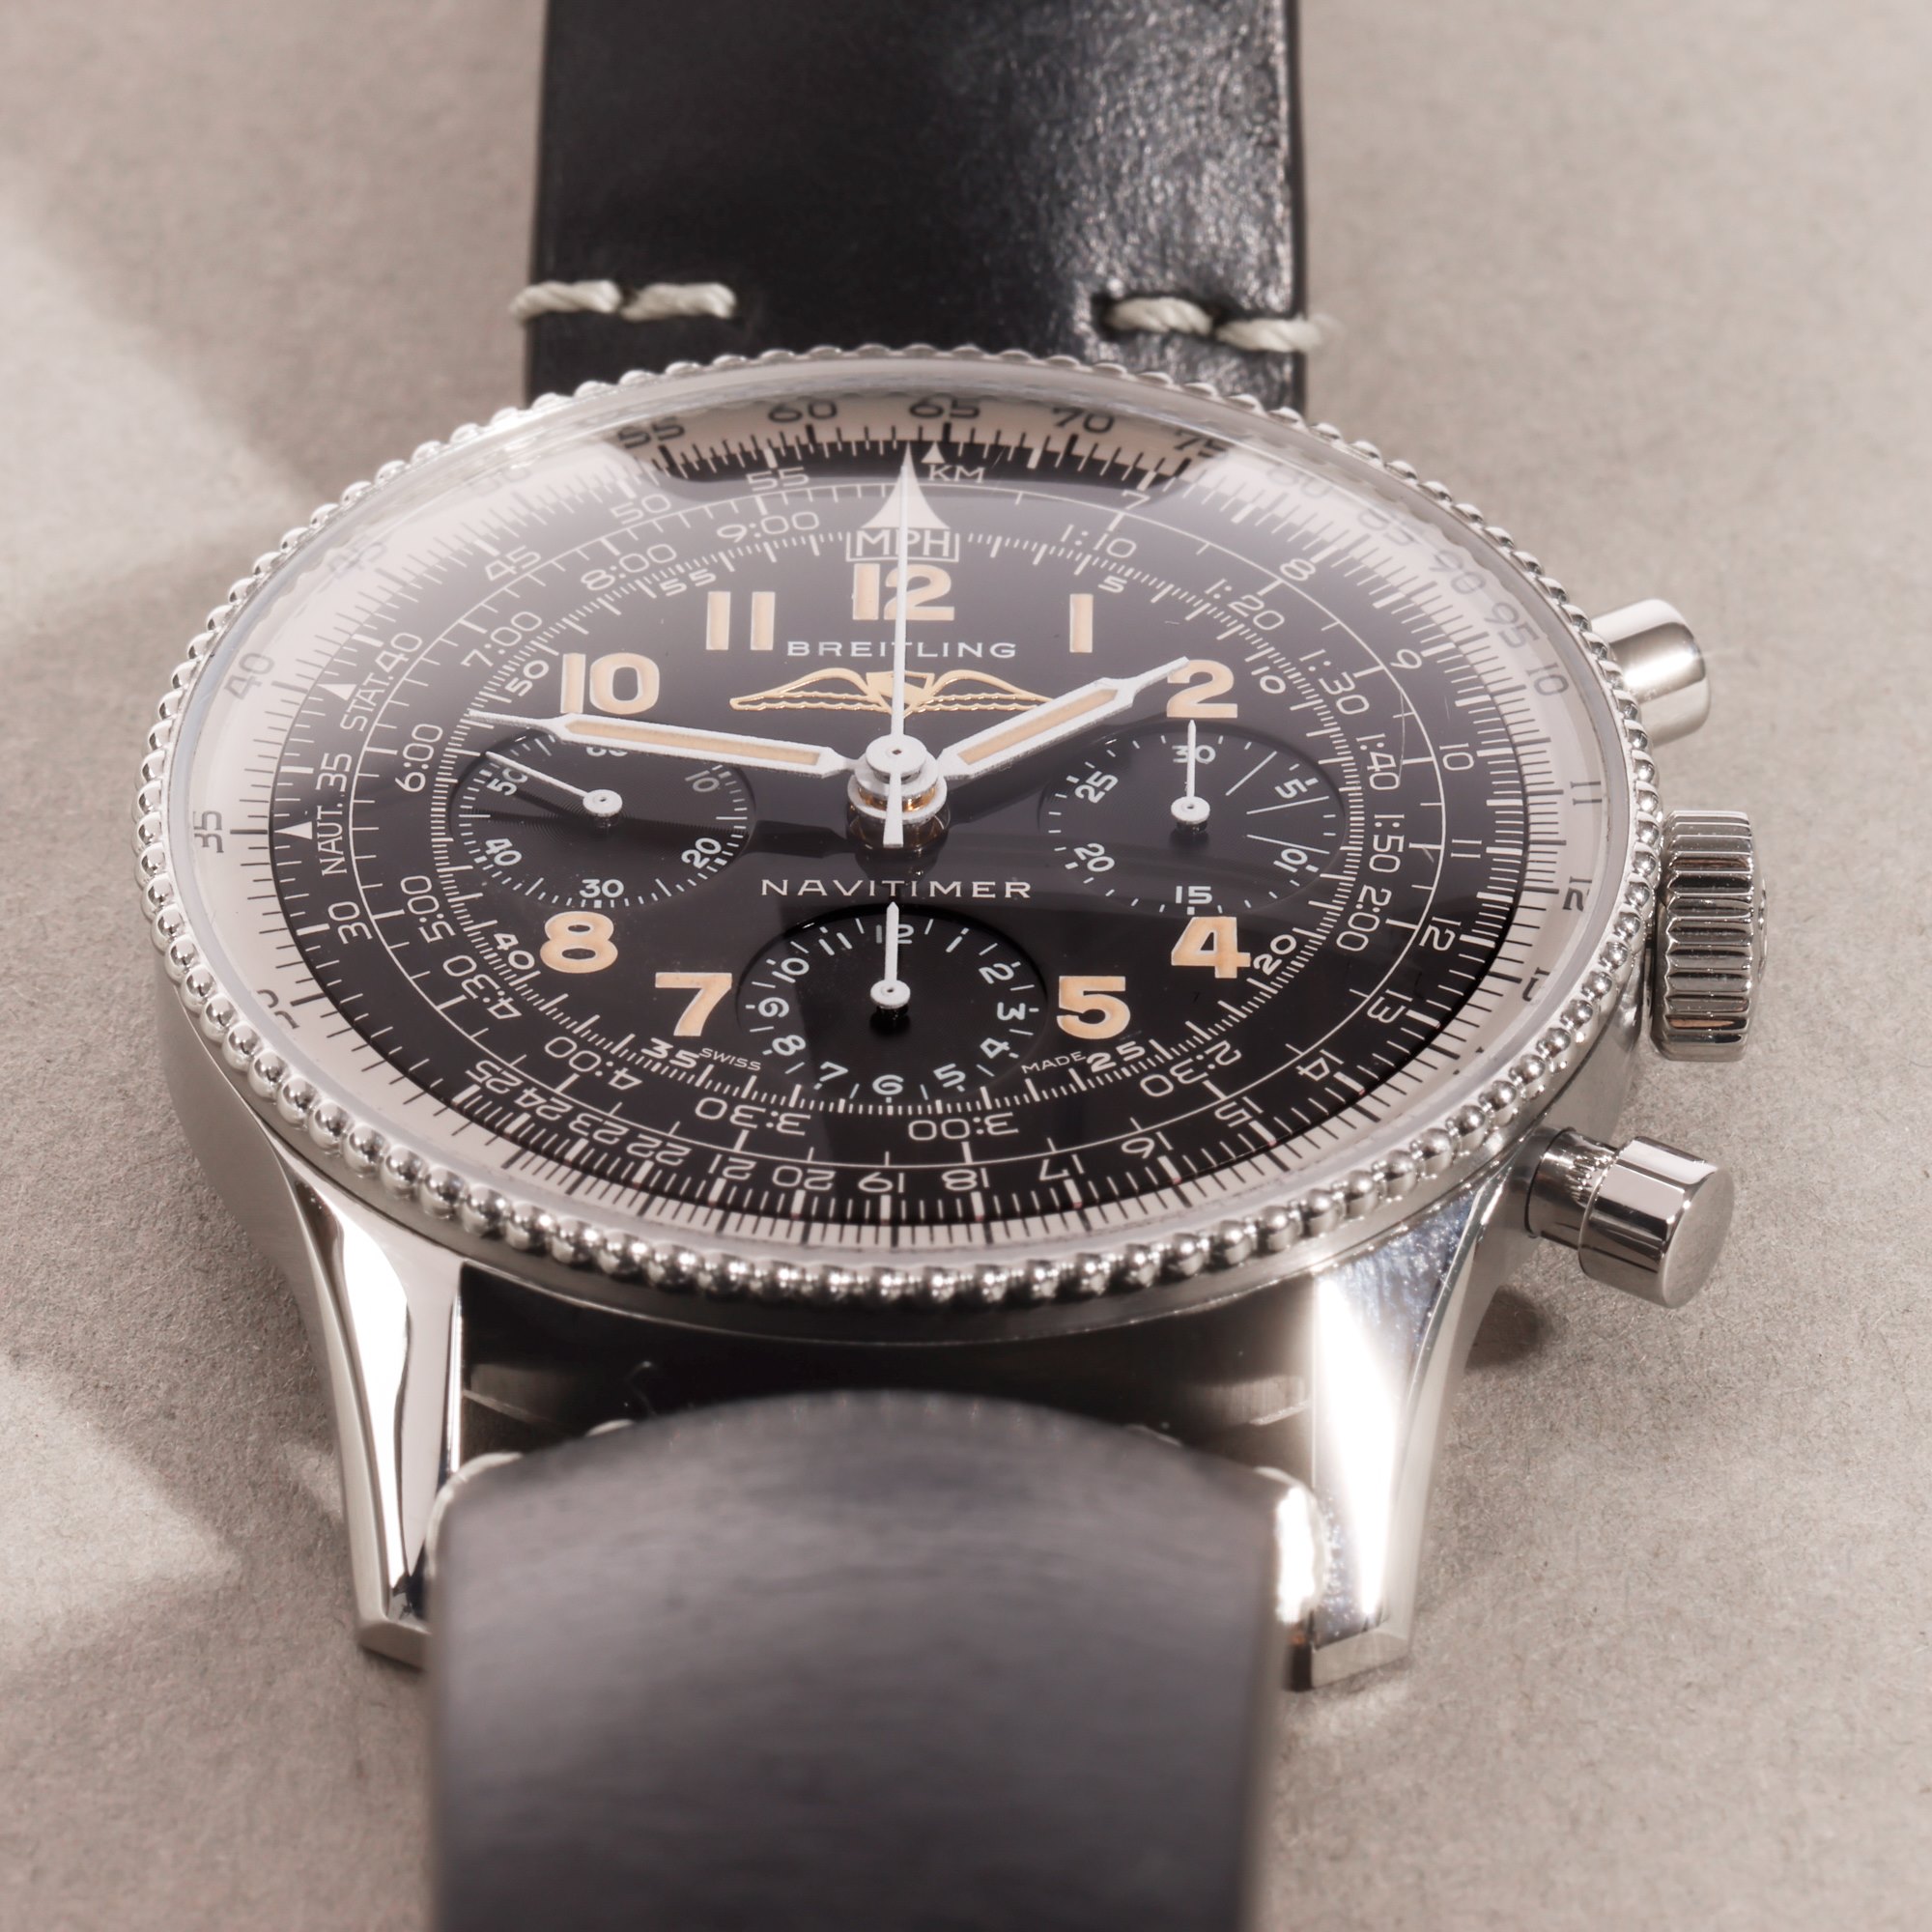 Breitling Navitimer 1959 Limited Edition Stainless Steel AB0910371/B1X1